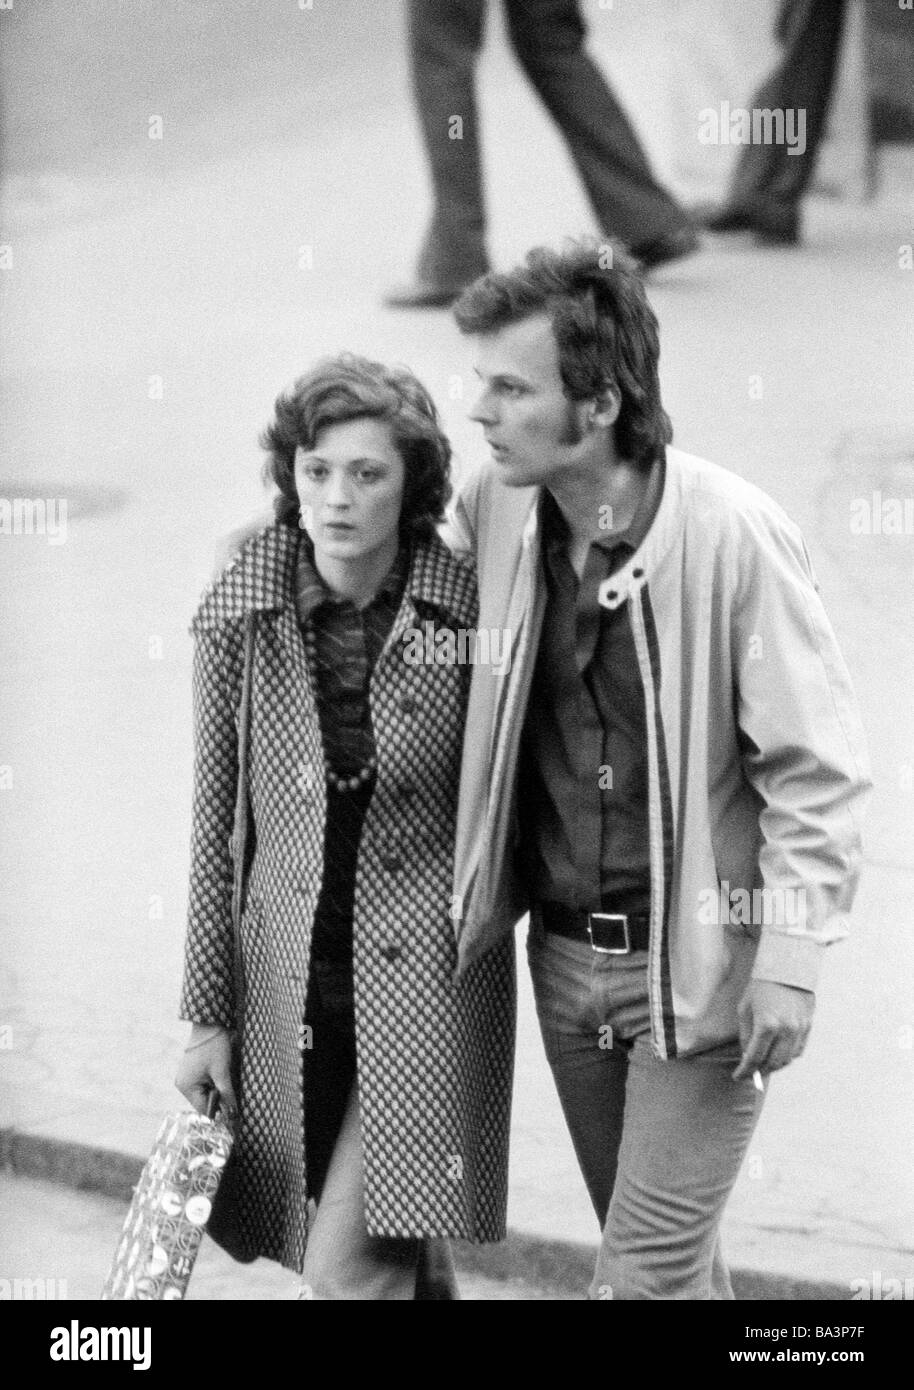 Seventies, black and white photo, people, young couple on a shopping expedition, aged 25 to 35 years, at that time Jugoslavia, Yugoslavia, today Slovenia, Ljubljana Stock Photo